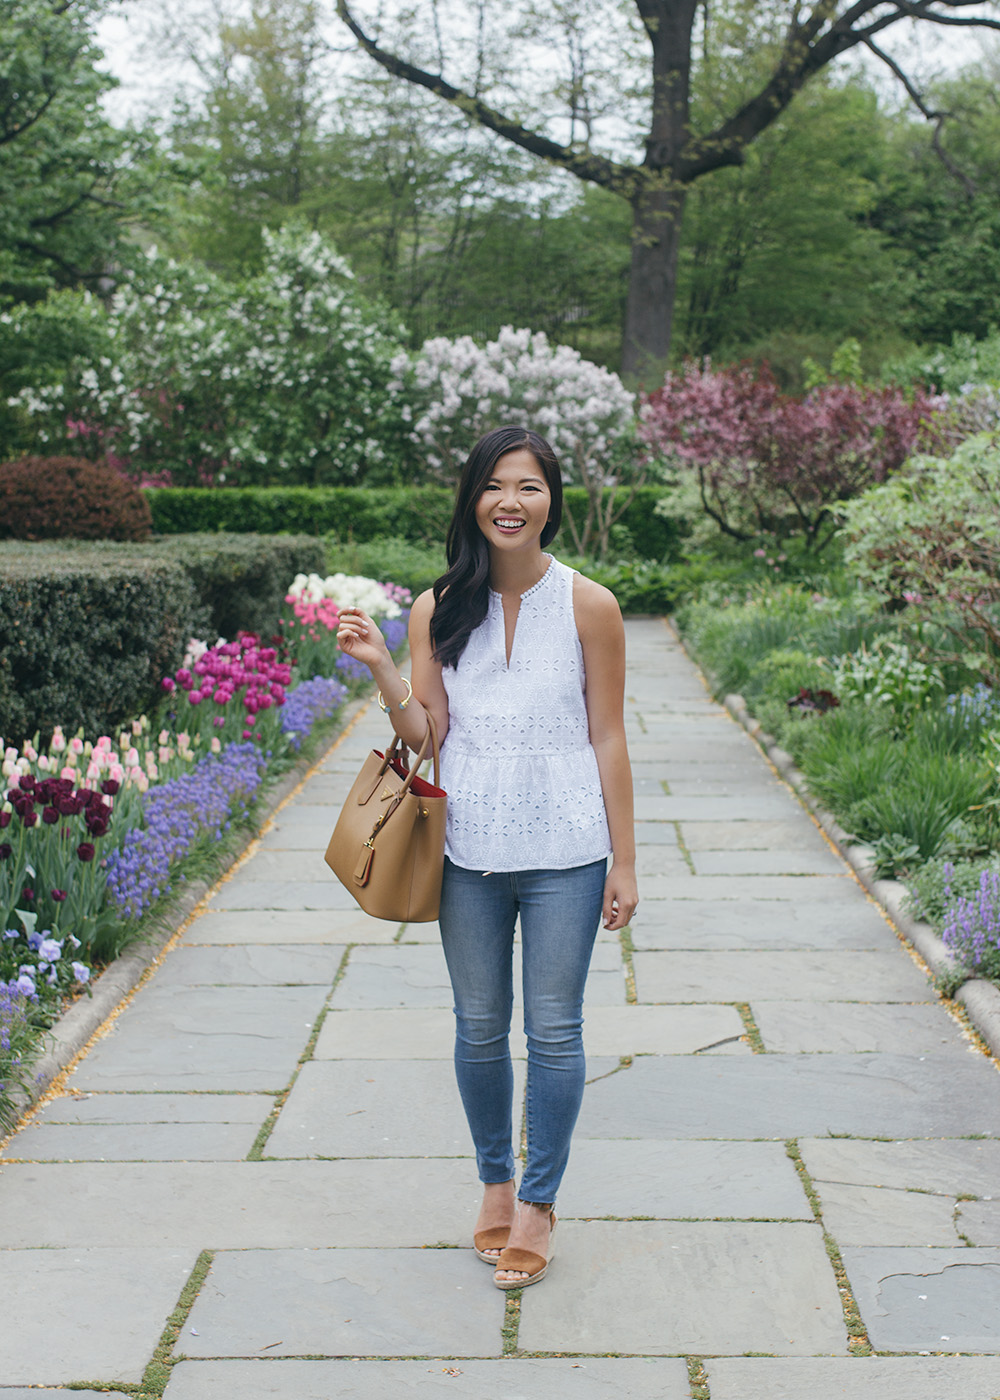 Casual Spring Outfit / Eyelet Top & Skinny Jeans